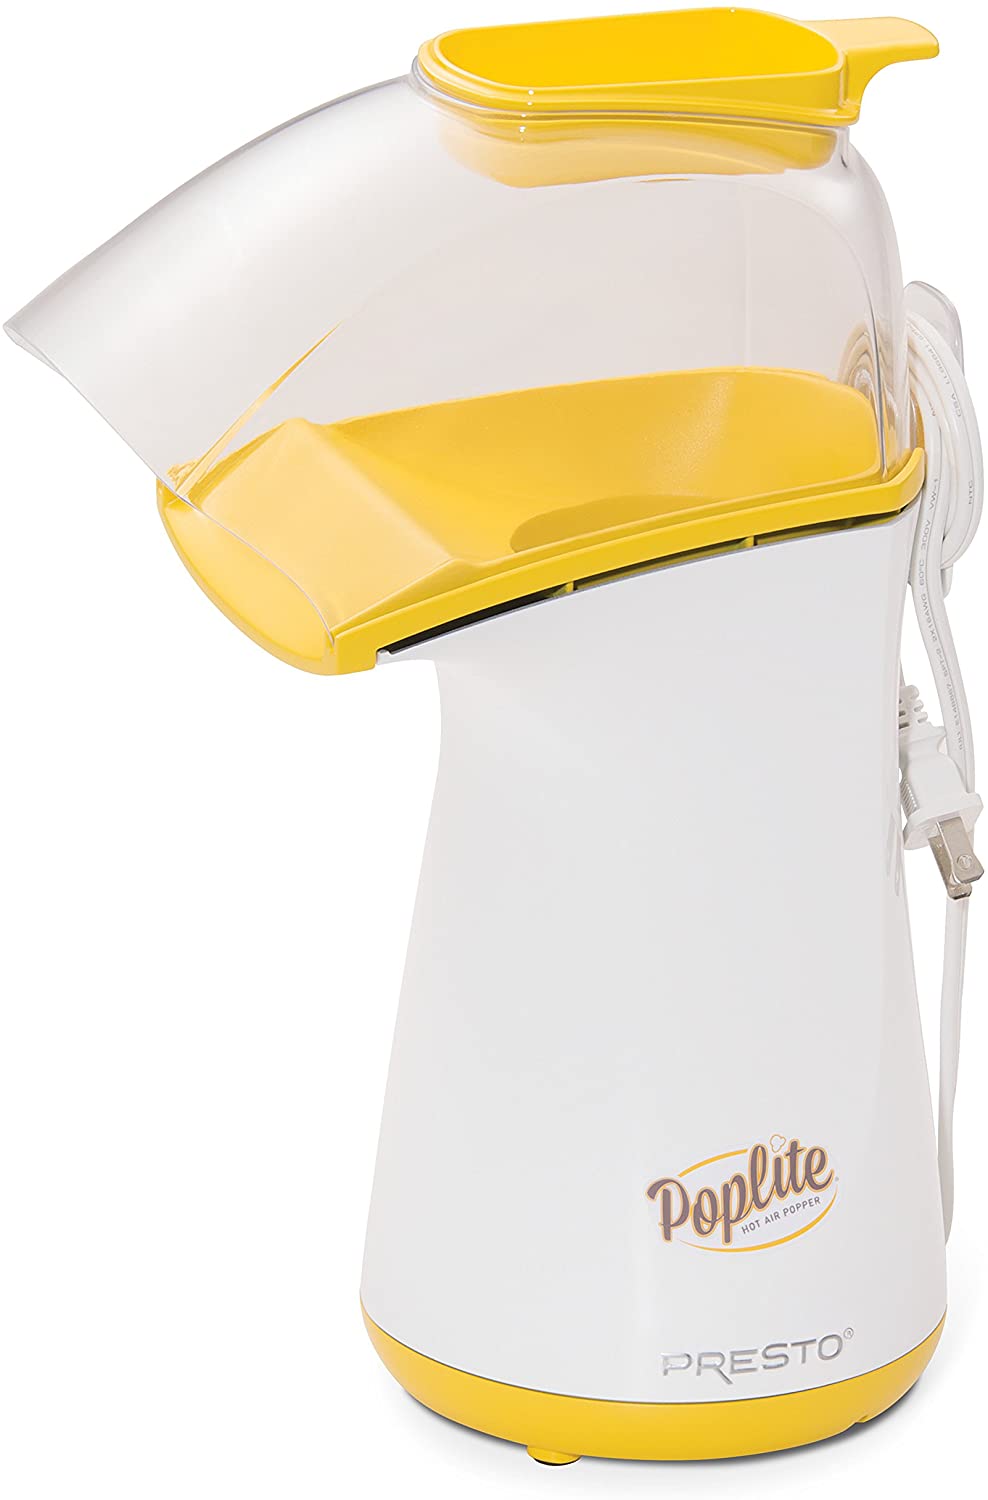 Presto 04820 PopLite Hot Air Popper, $18 @amazon.com (Air popper for popcorn, so they can snack easily and healthfully. This popcorn popper uses hot air to pop the corn kernels - not oil!)